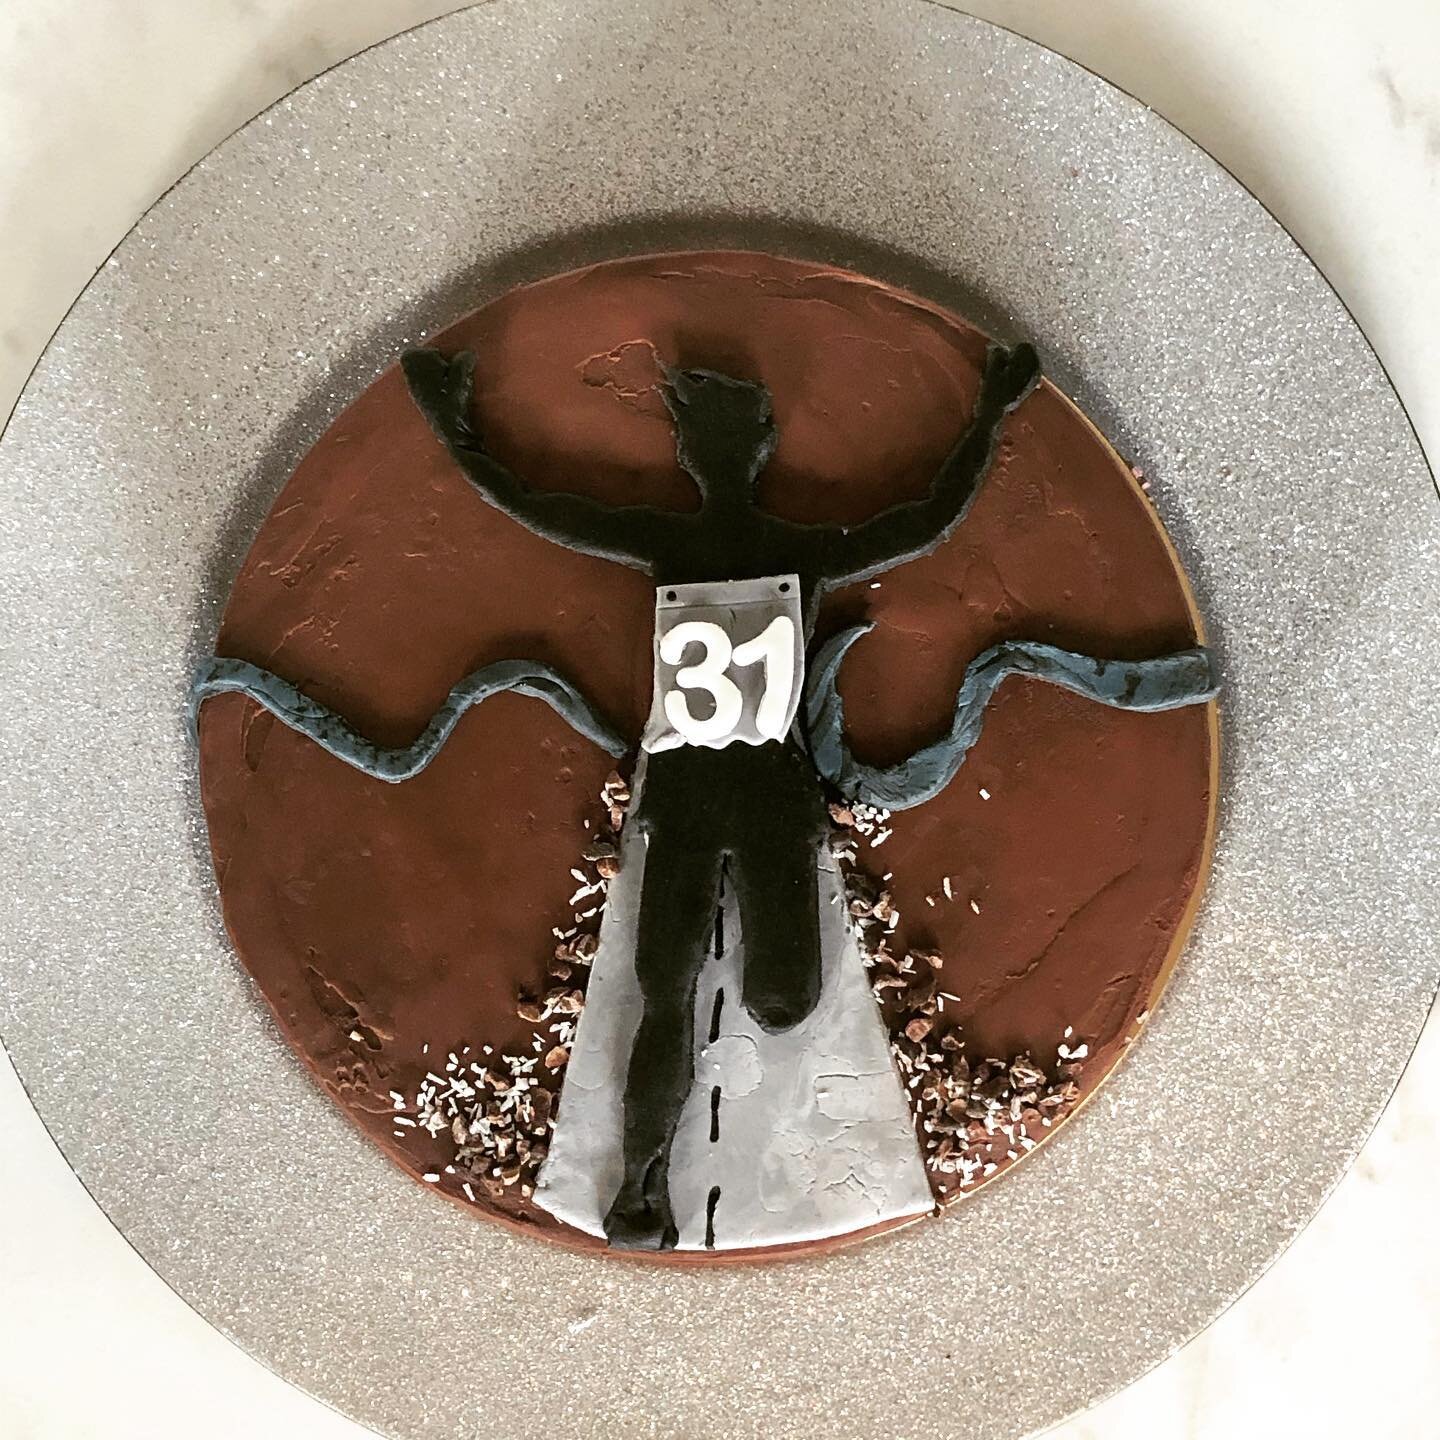 Next up... the Runner!
My client wanted a death by chocolate cake for her brother&rsquo;s 31st birthday, but wasn&rsquo;t sure about the design... nothing she found online seemed quite right. So I had this idea of cutting out a silhouette of a runner